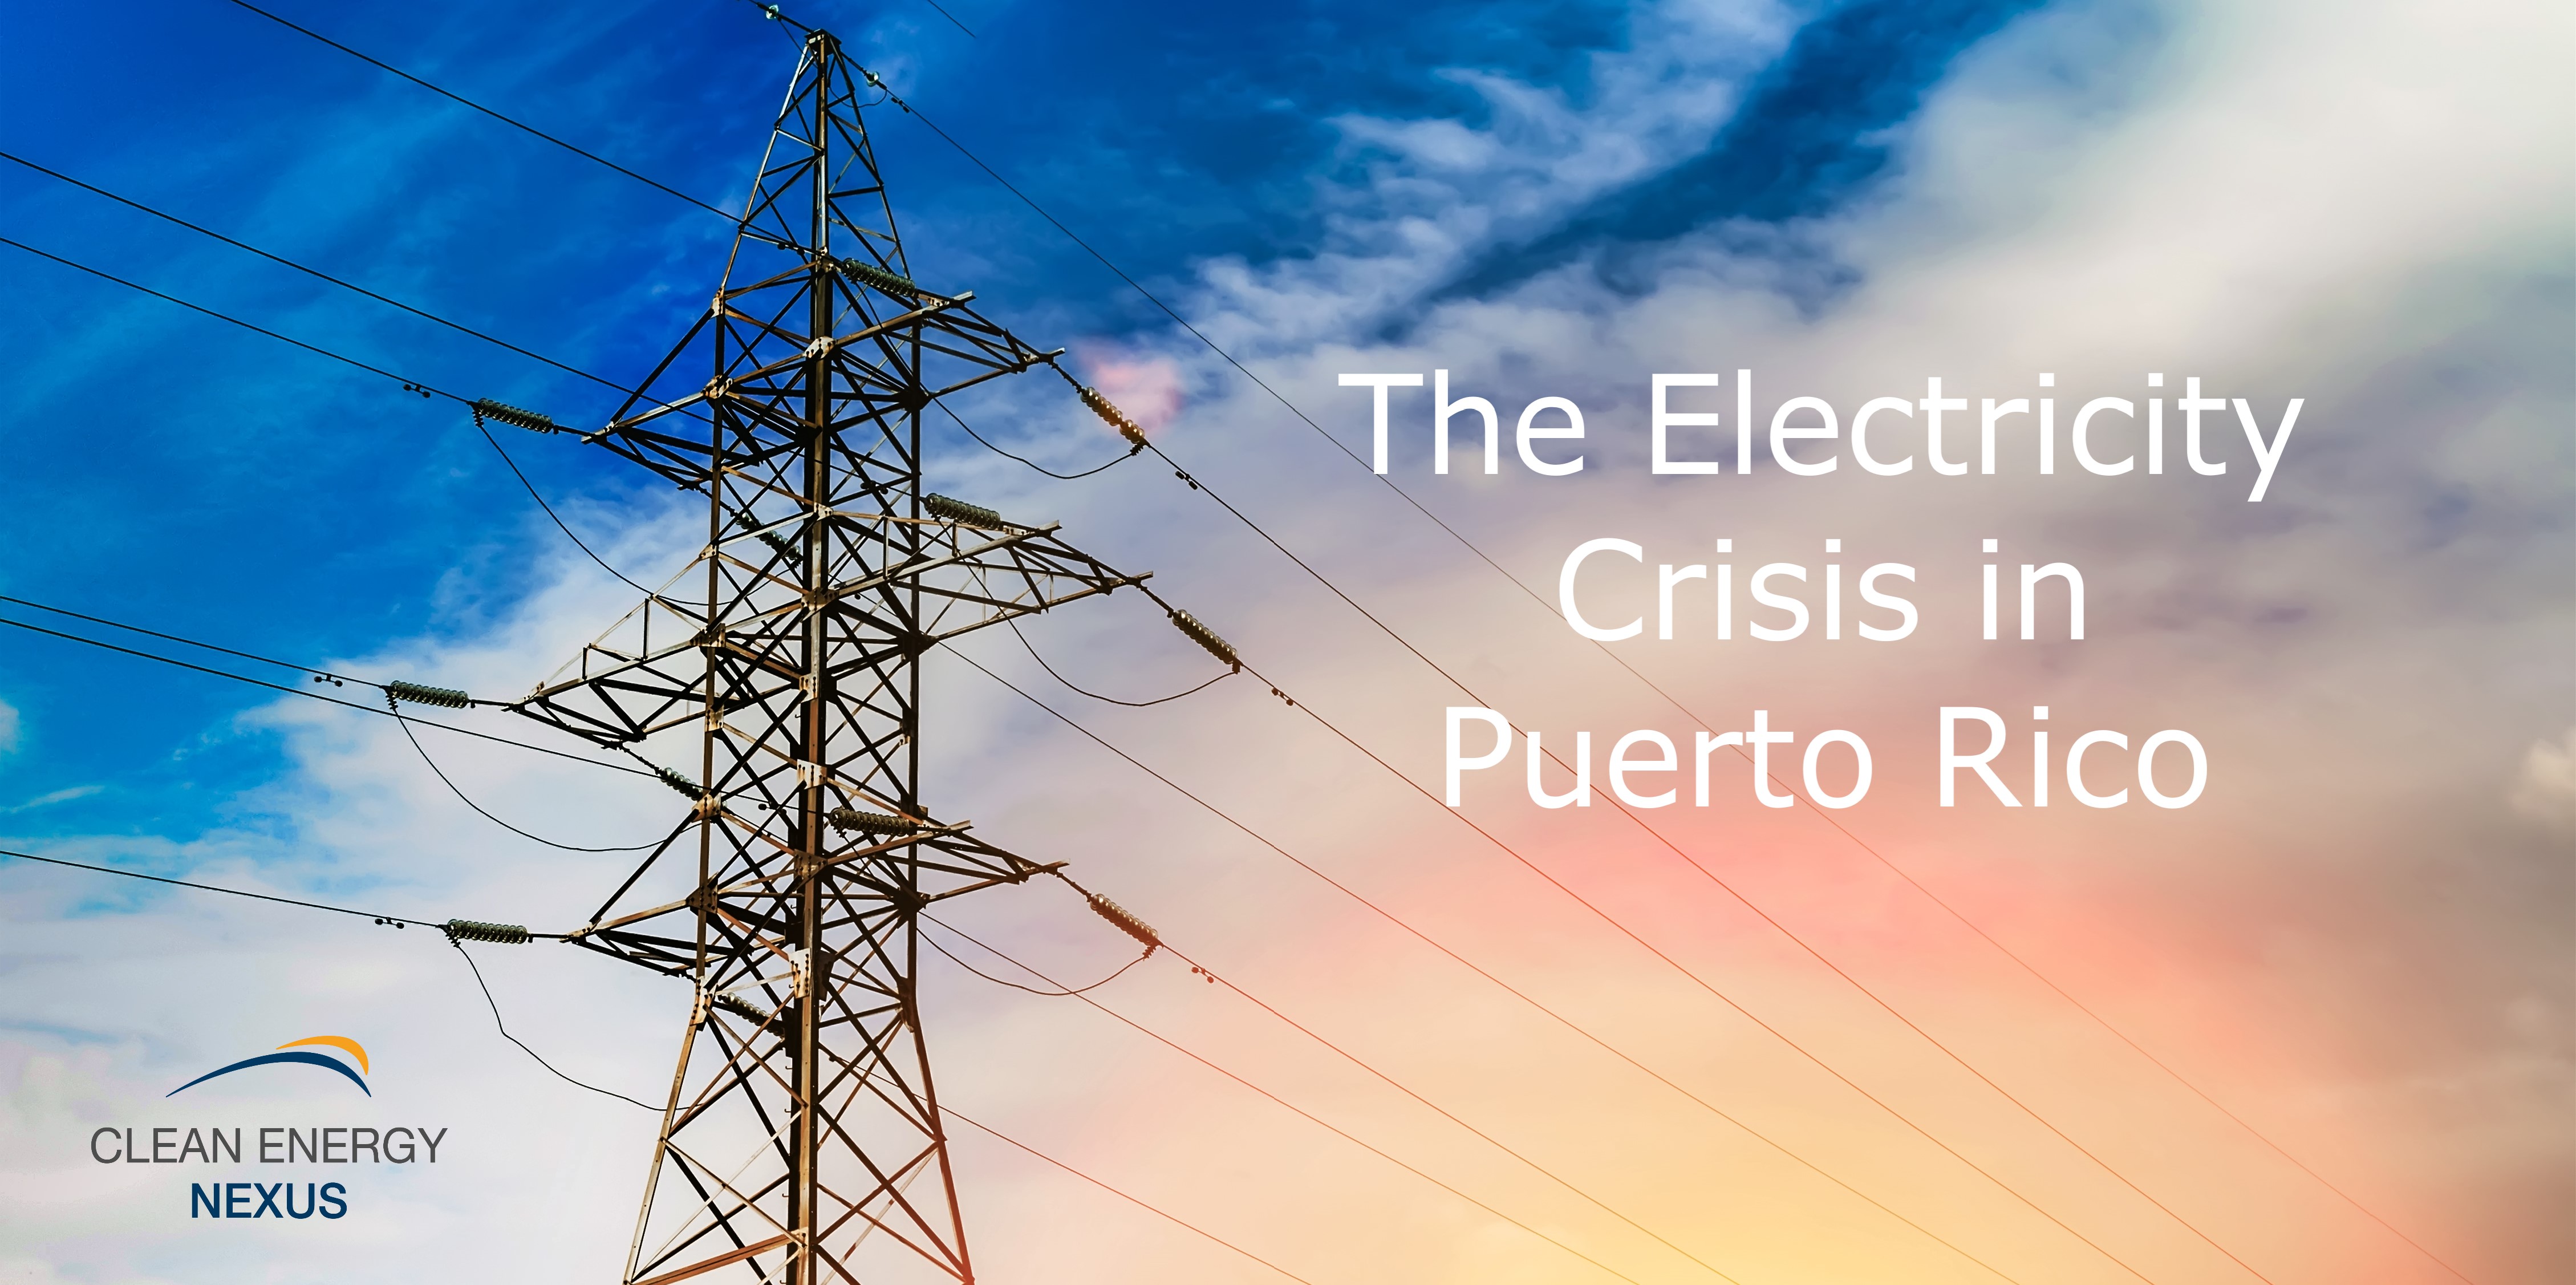 The Electricity Crisis in Puerto Rico